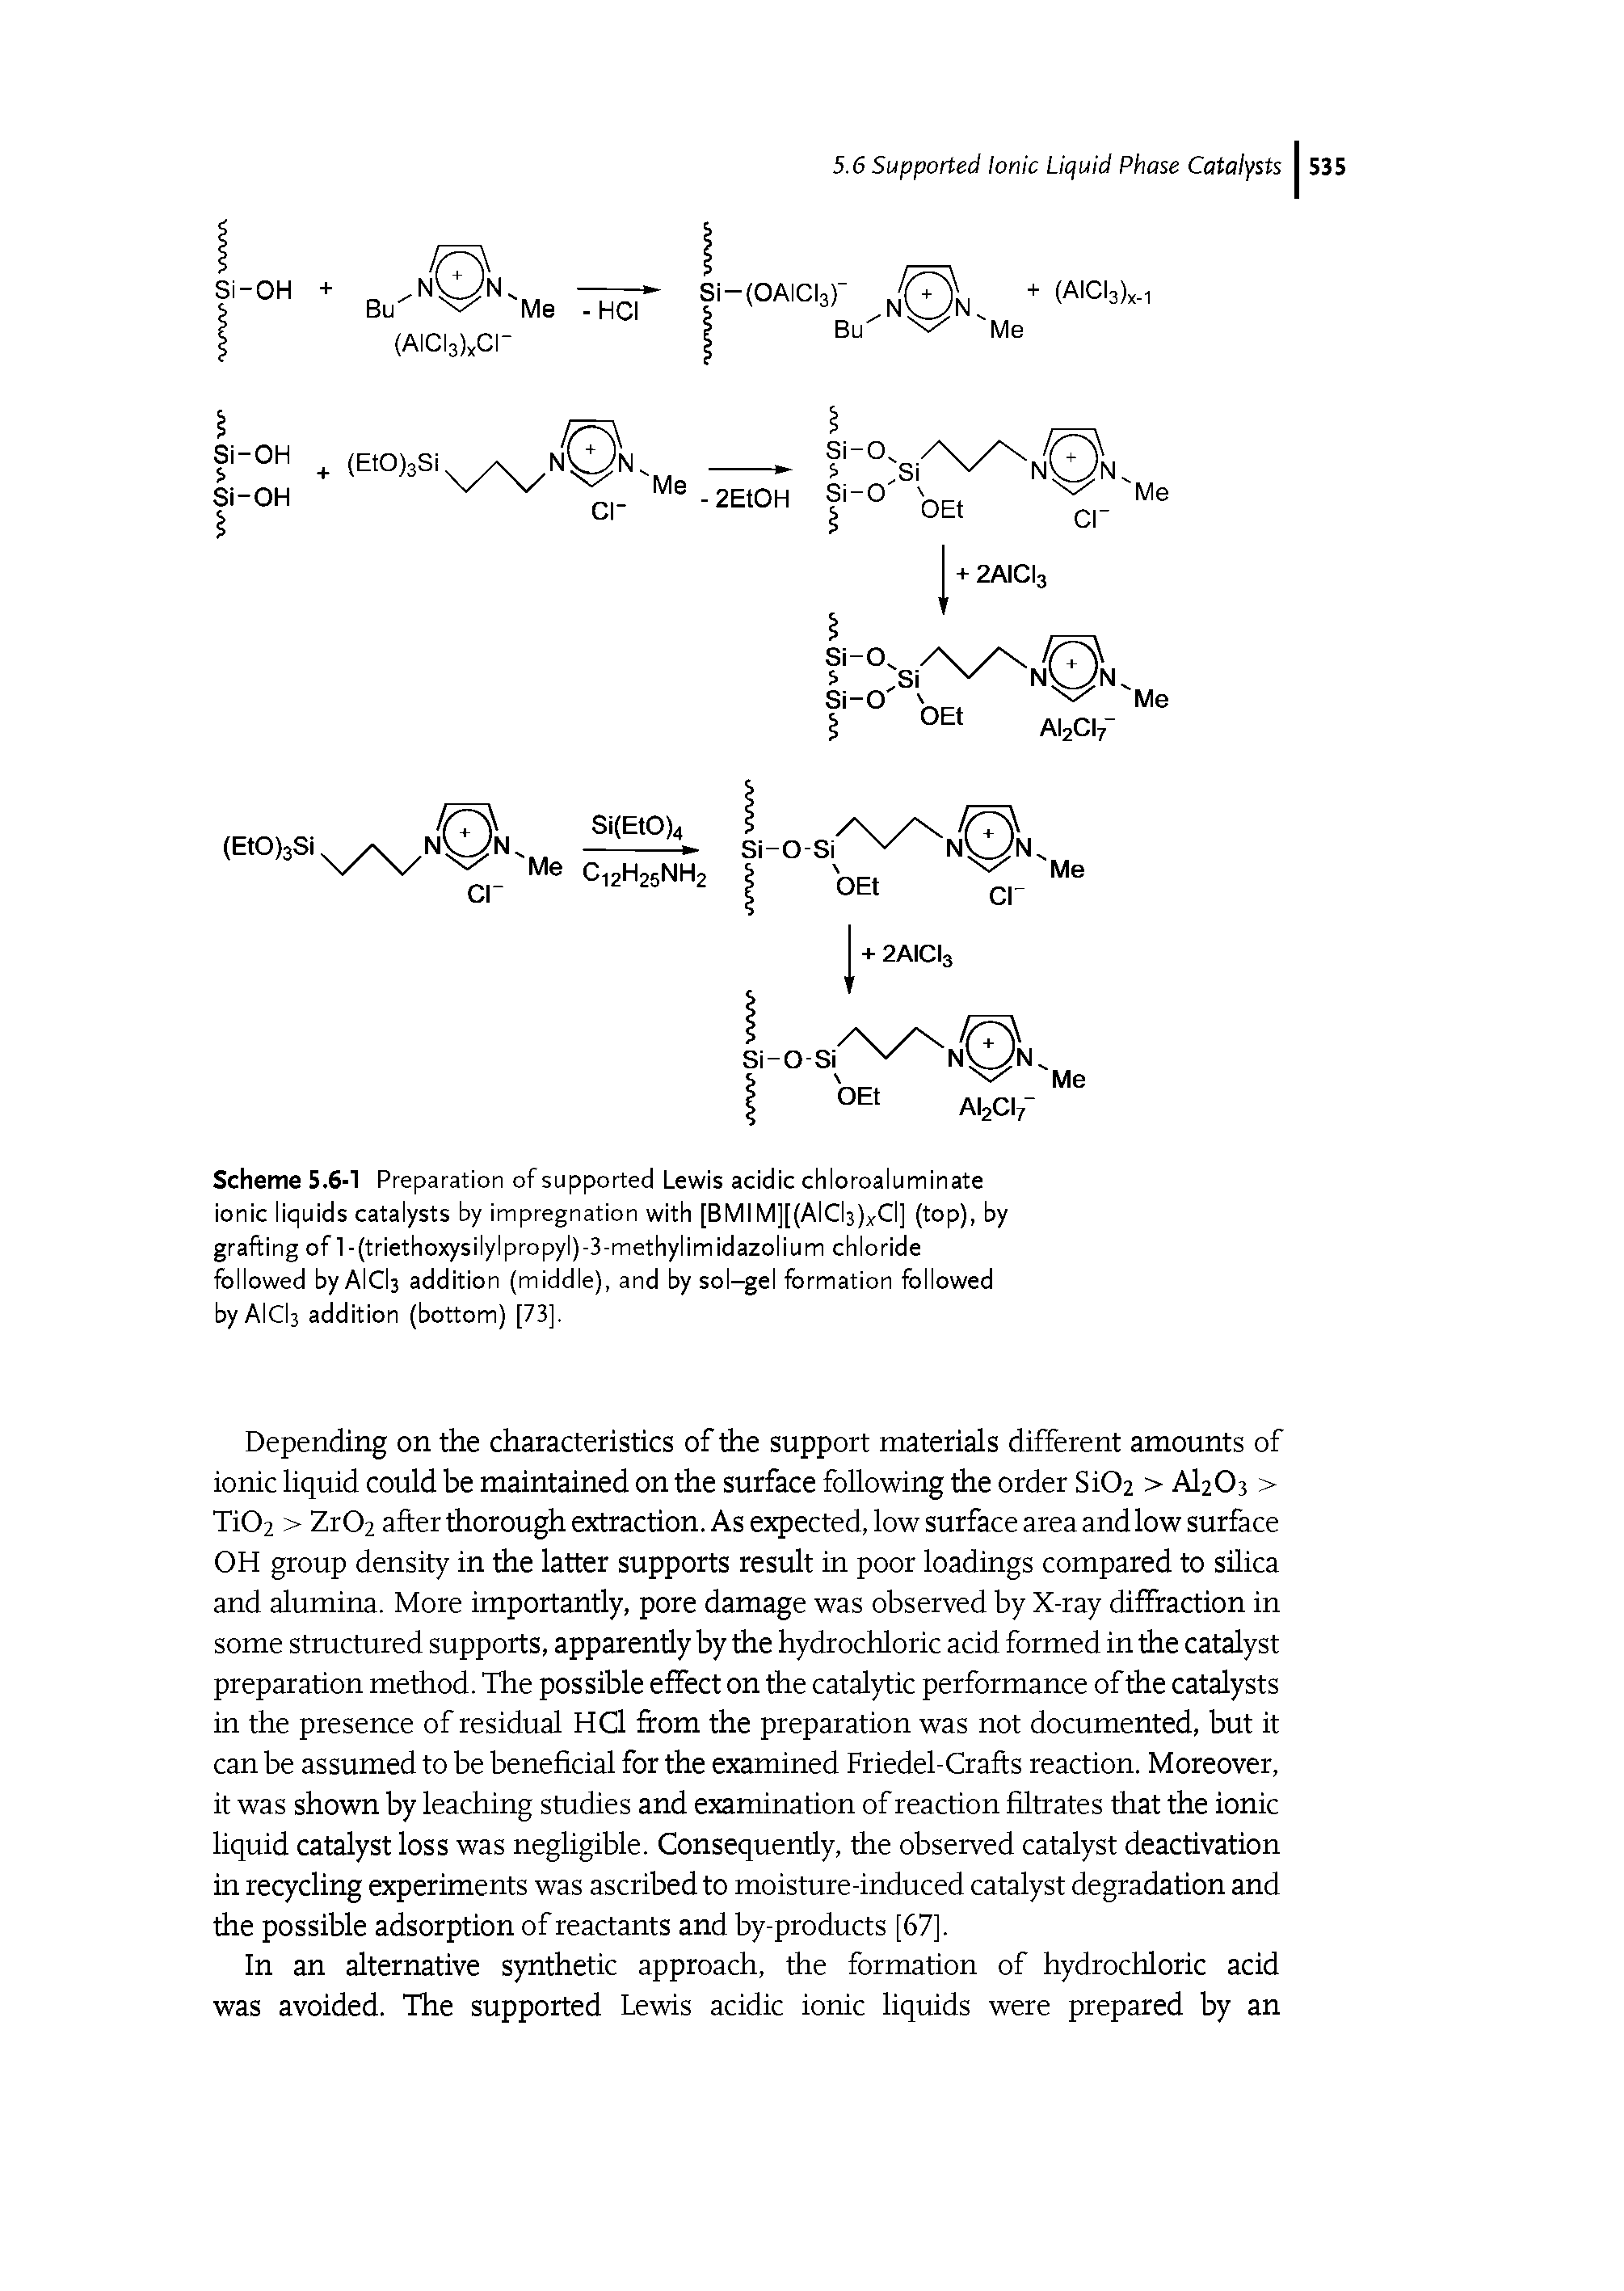 Scheme 5.6-1 Preparation of supported Lewis acidic chloroaluminate ionic liquids catalysts by impregnation with [BMIM][(AICl3)jfCl] (top), by grafting of l-(triethoxysilylpropyl)-3-methylimidazolium chloride followed by AICI3 addition (middle), and by sol-gel formation followed byAICis addition (bottom) [73].